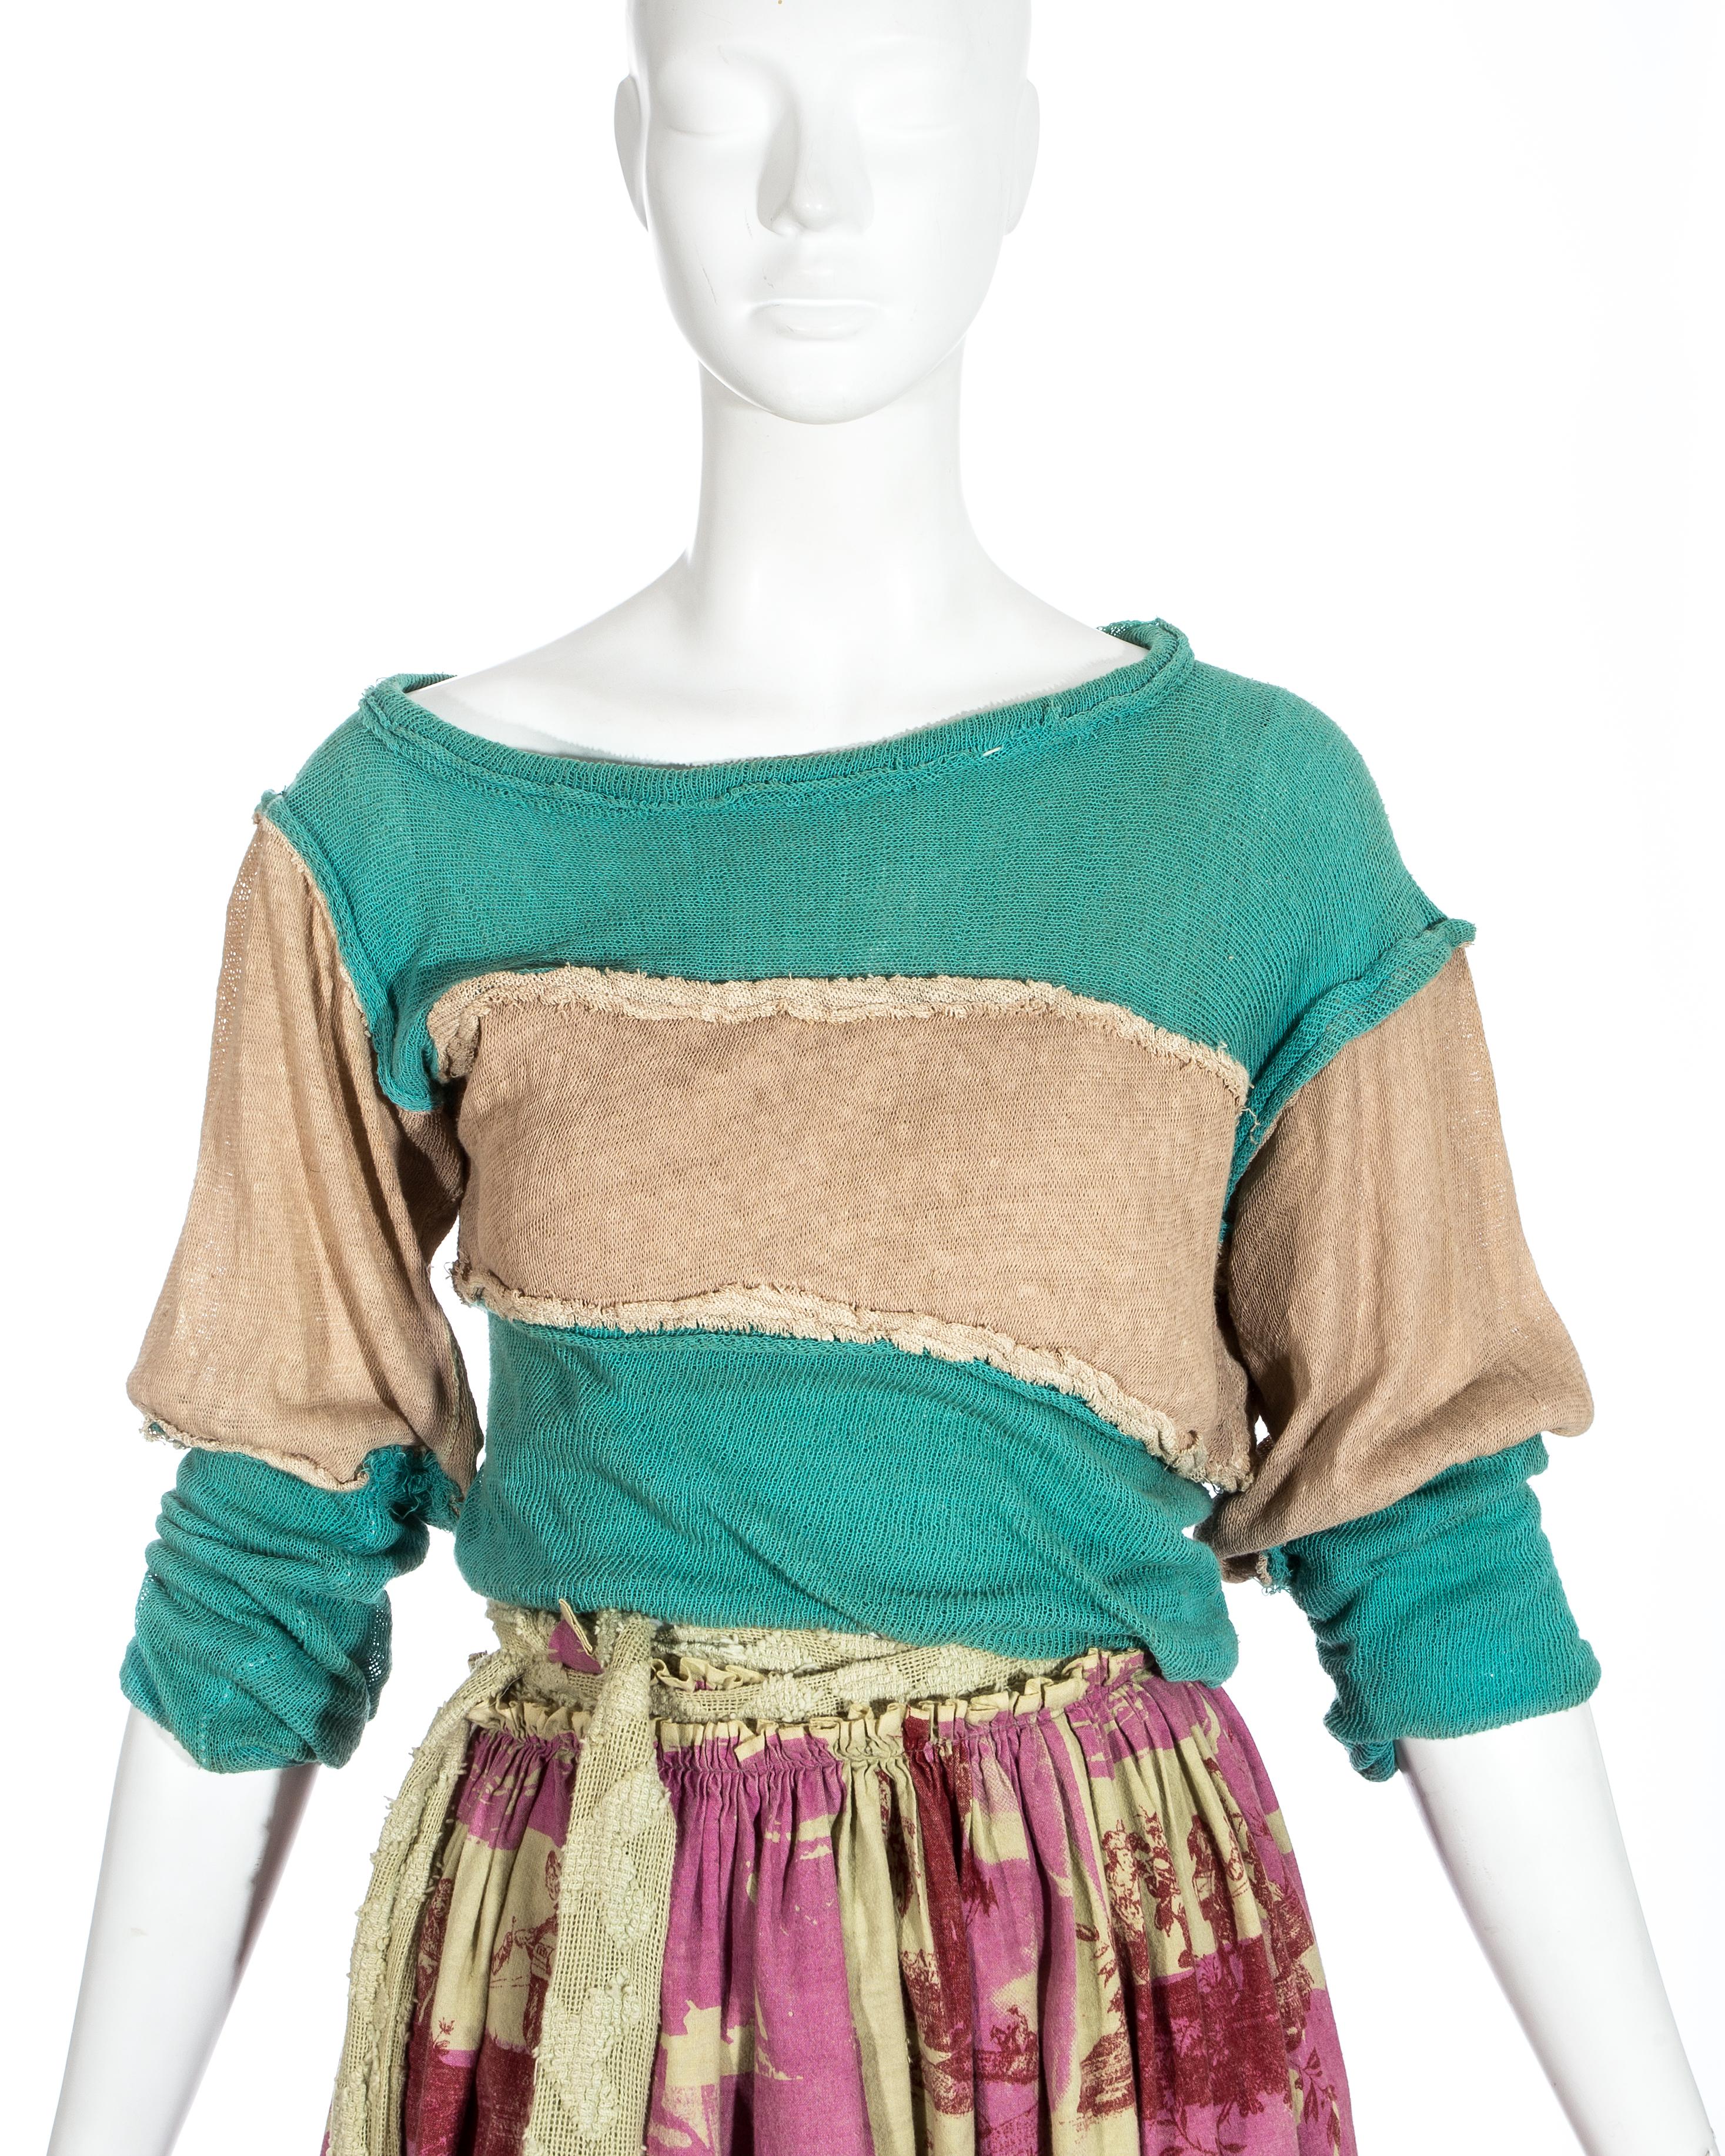 Brown Worlds End 'Punkature' wrap skirt and sweater ensemble, ss 1983